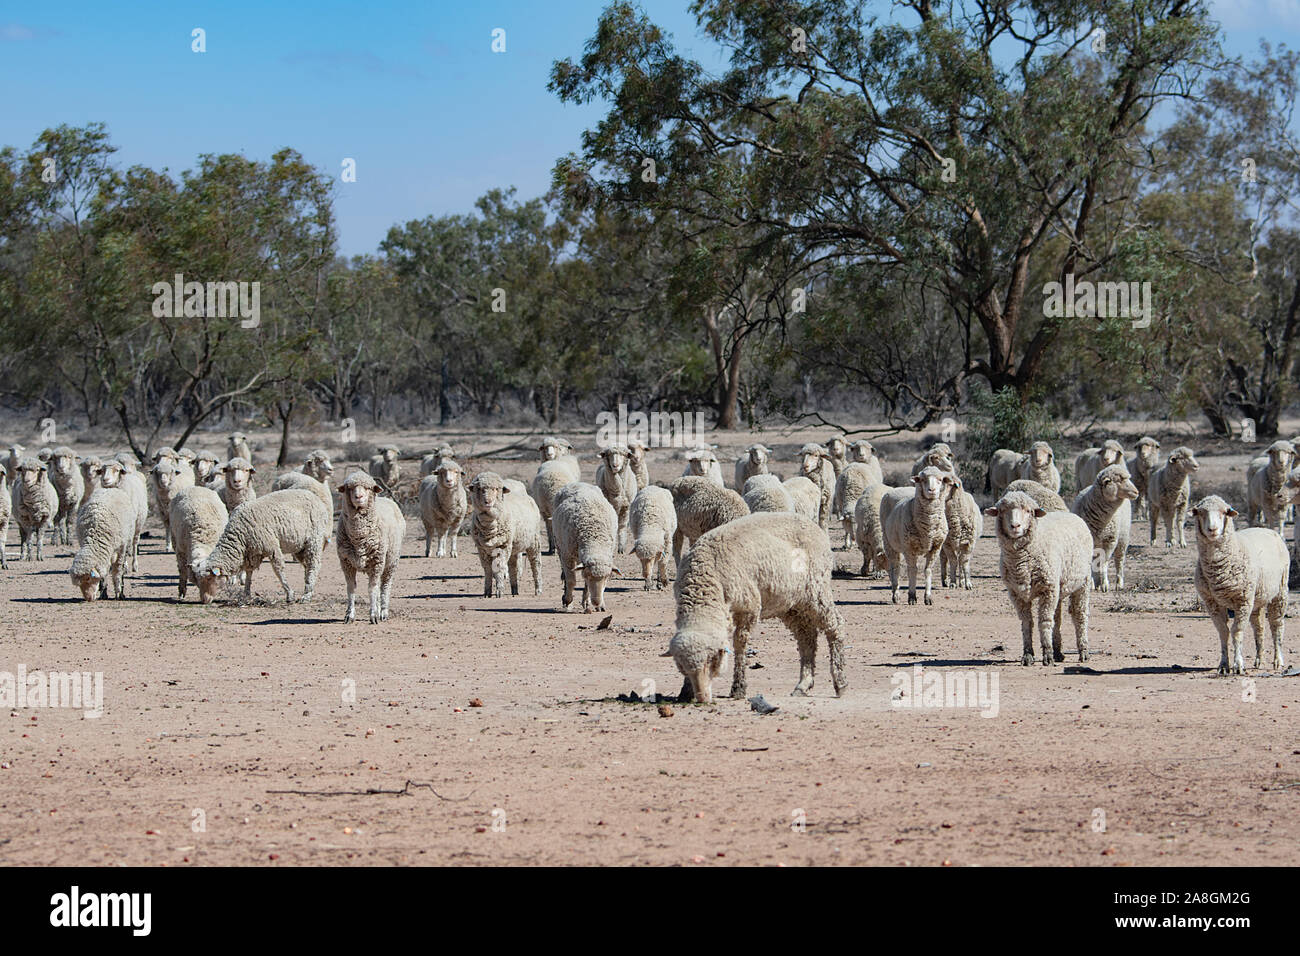 Flock of sheep struggling to feed on barren land during a severe drought, near Walgett, New South Wales, NSW, Australia Stock Photo